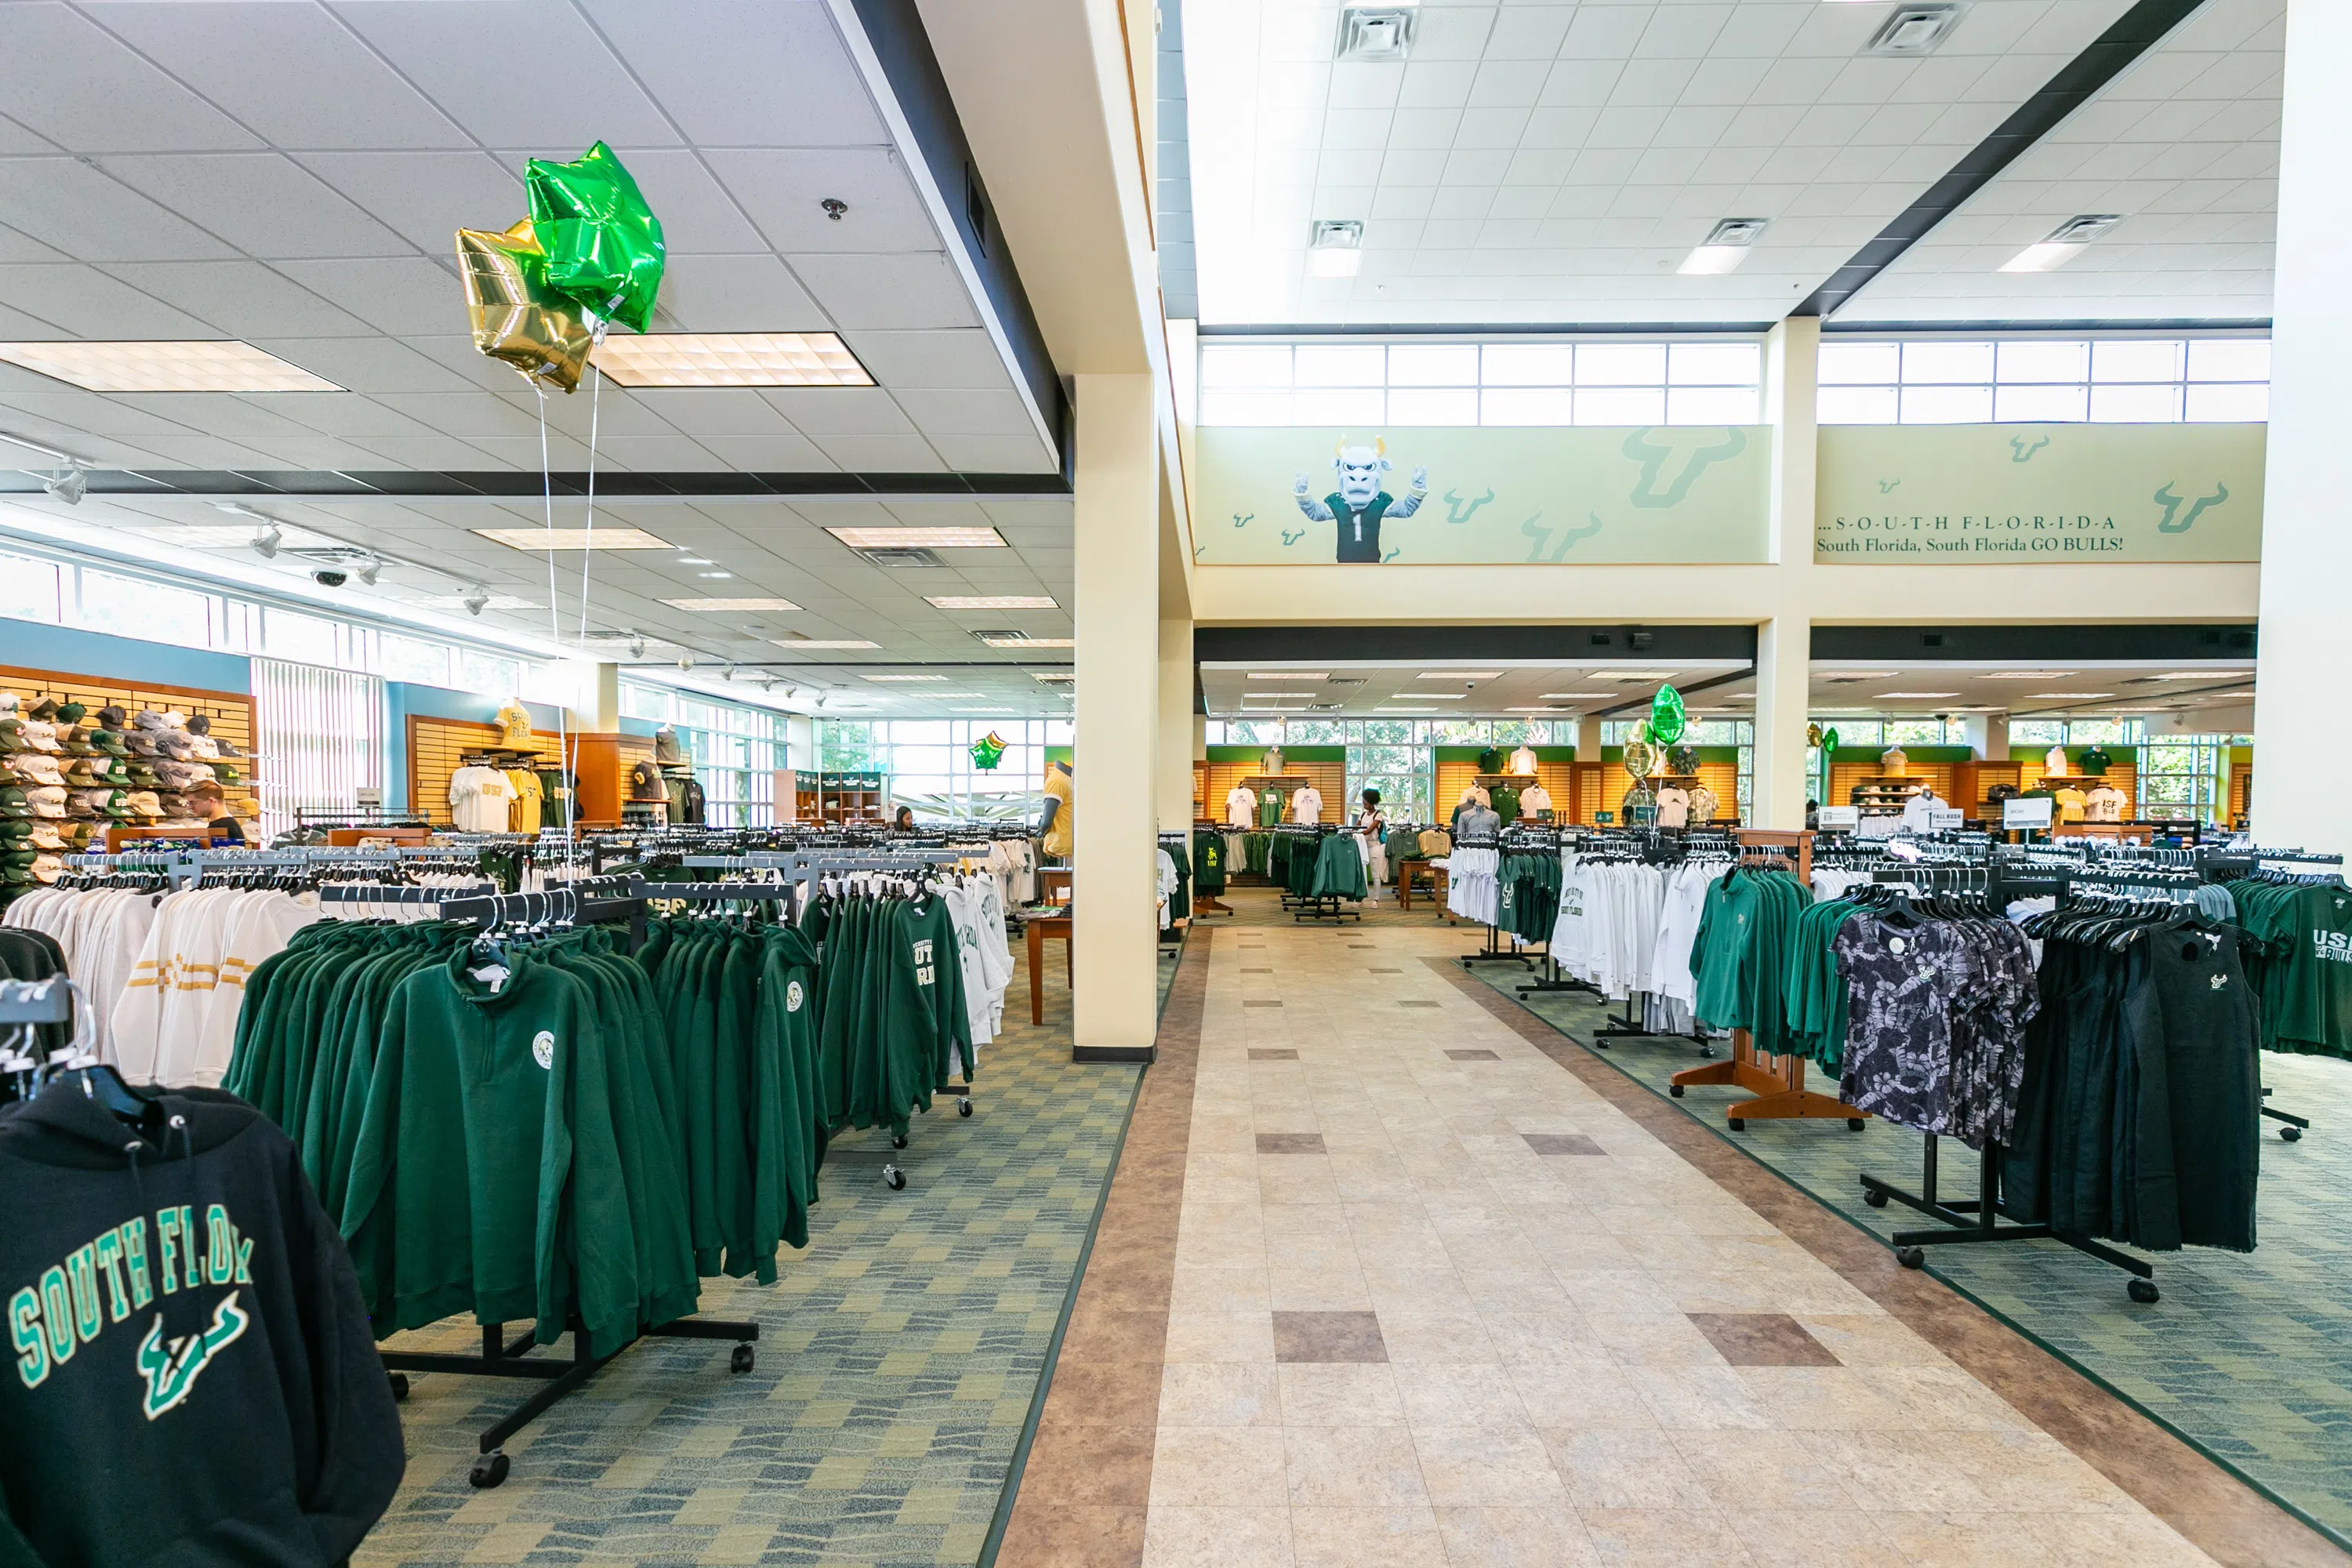 Green, gold and white merchandise all spread throughout the store on sale racks.